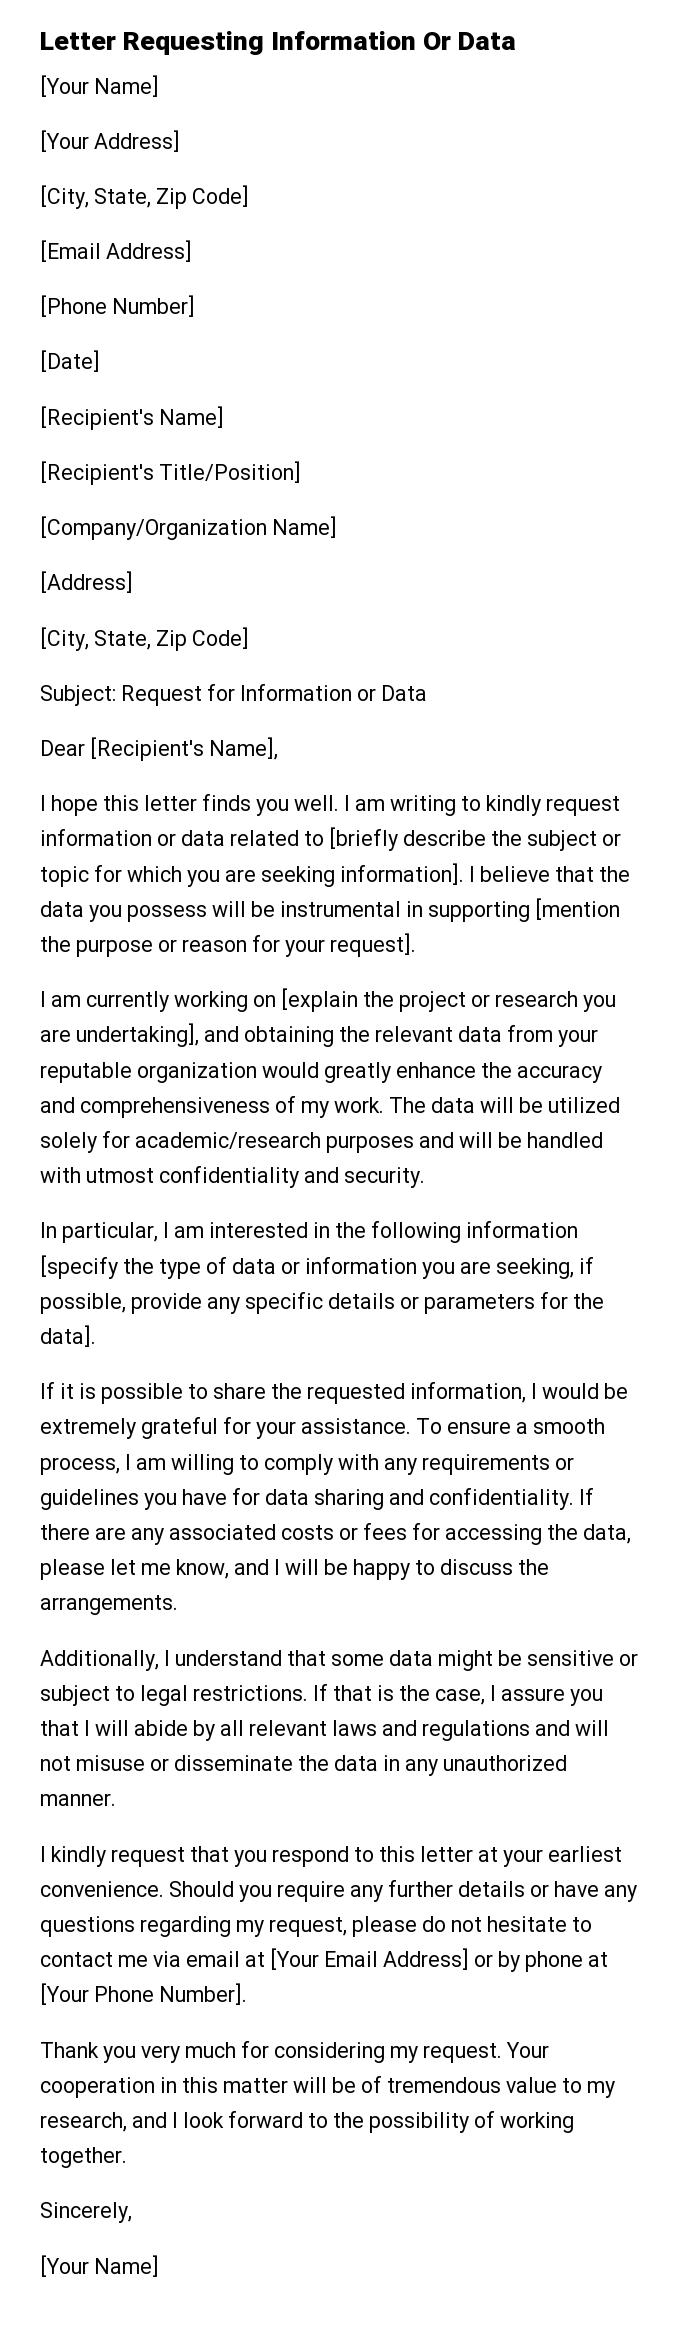 Letter Requesting Information Or Data